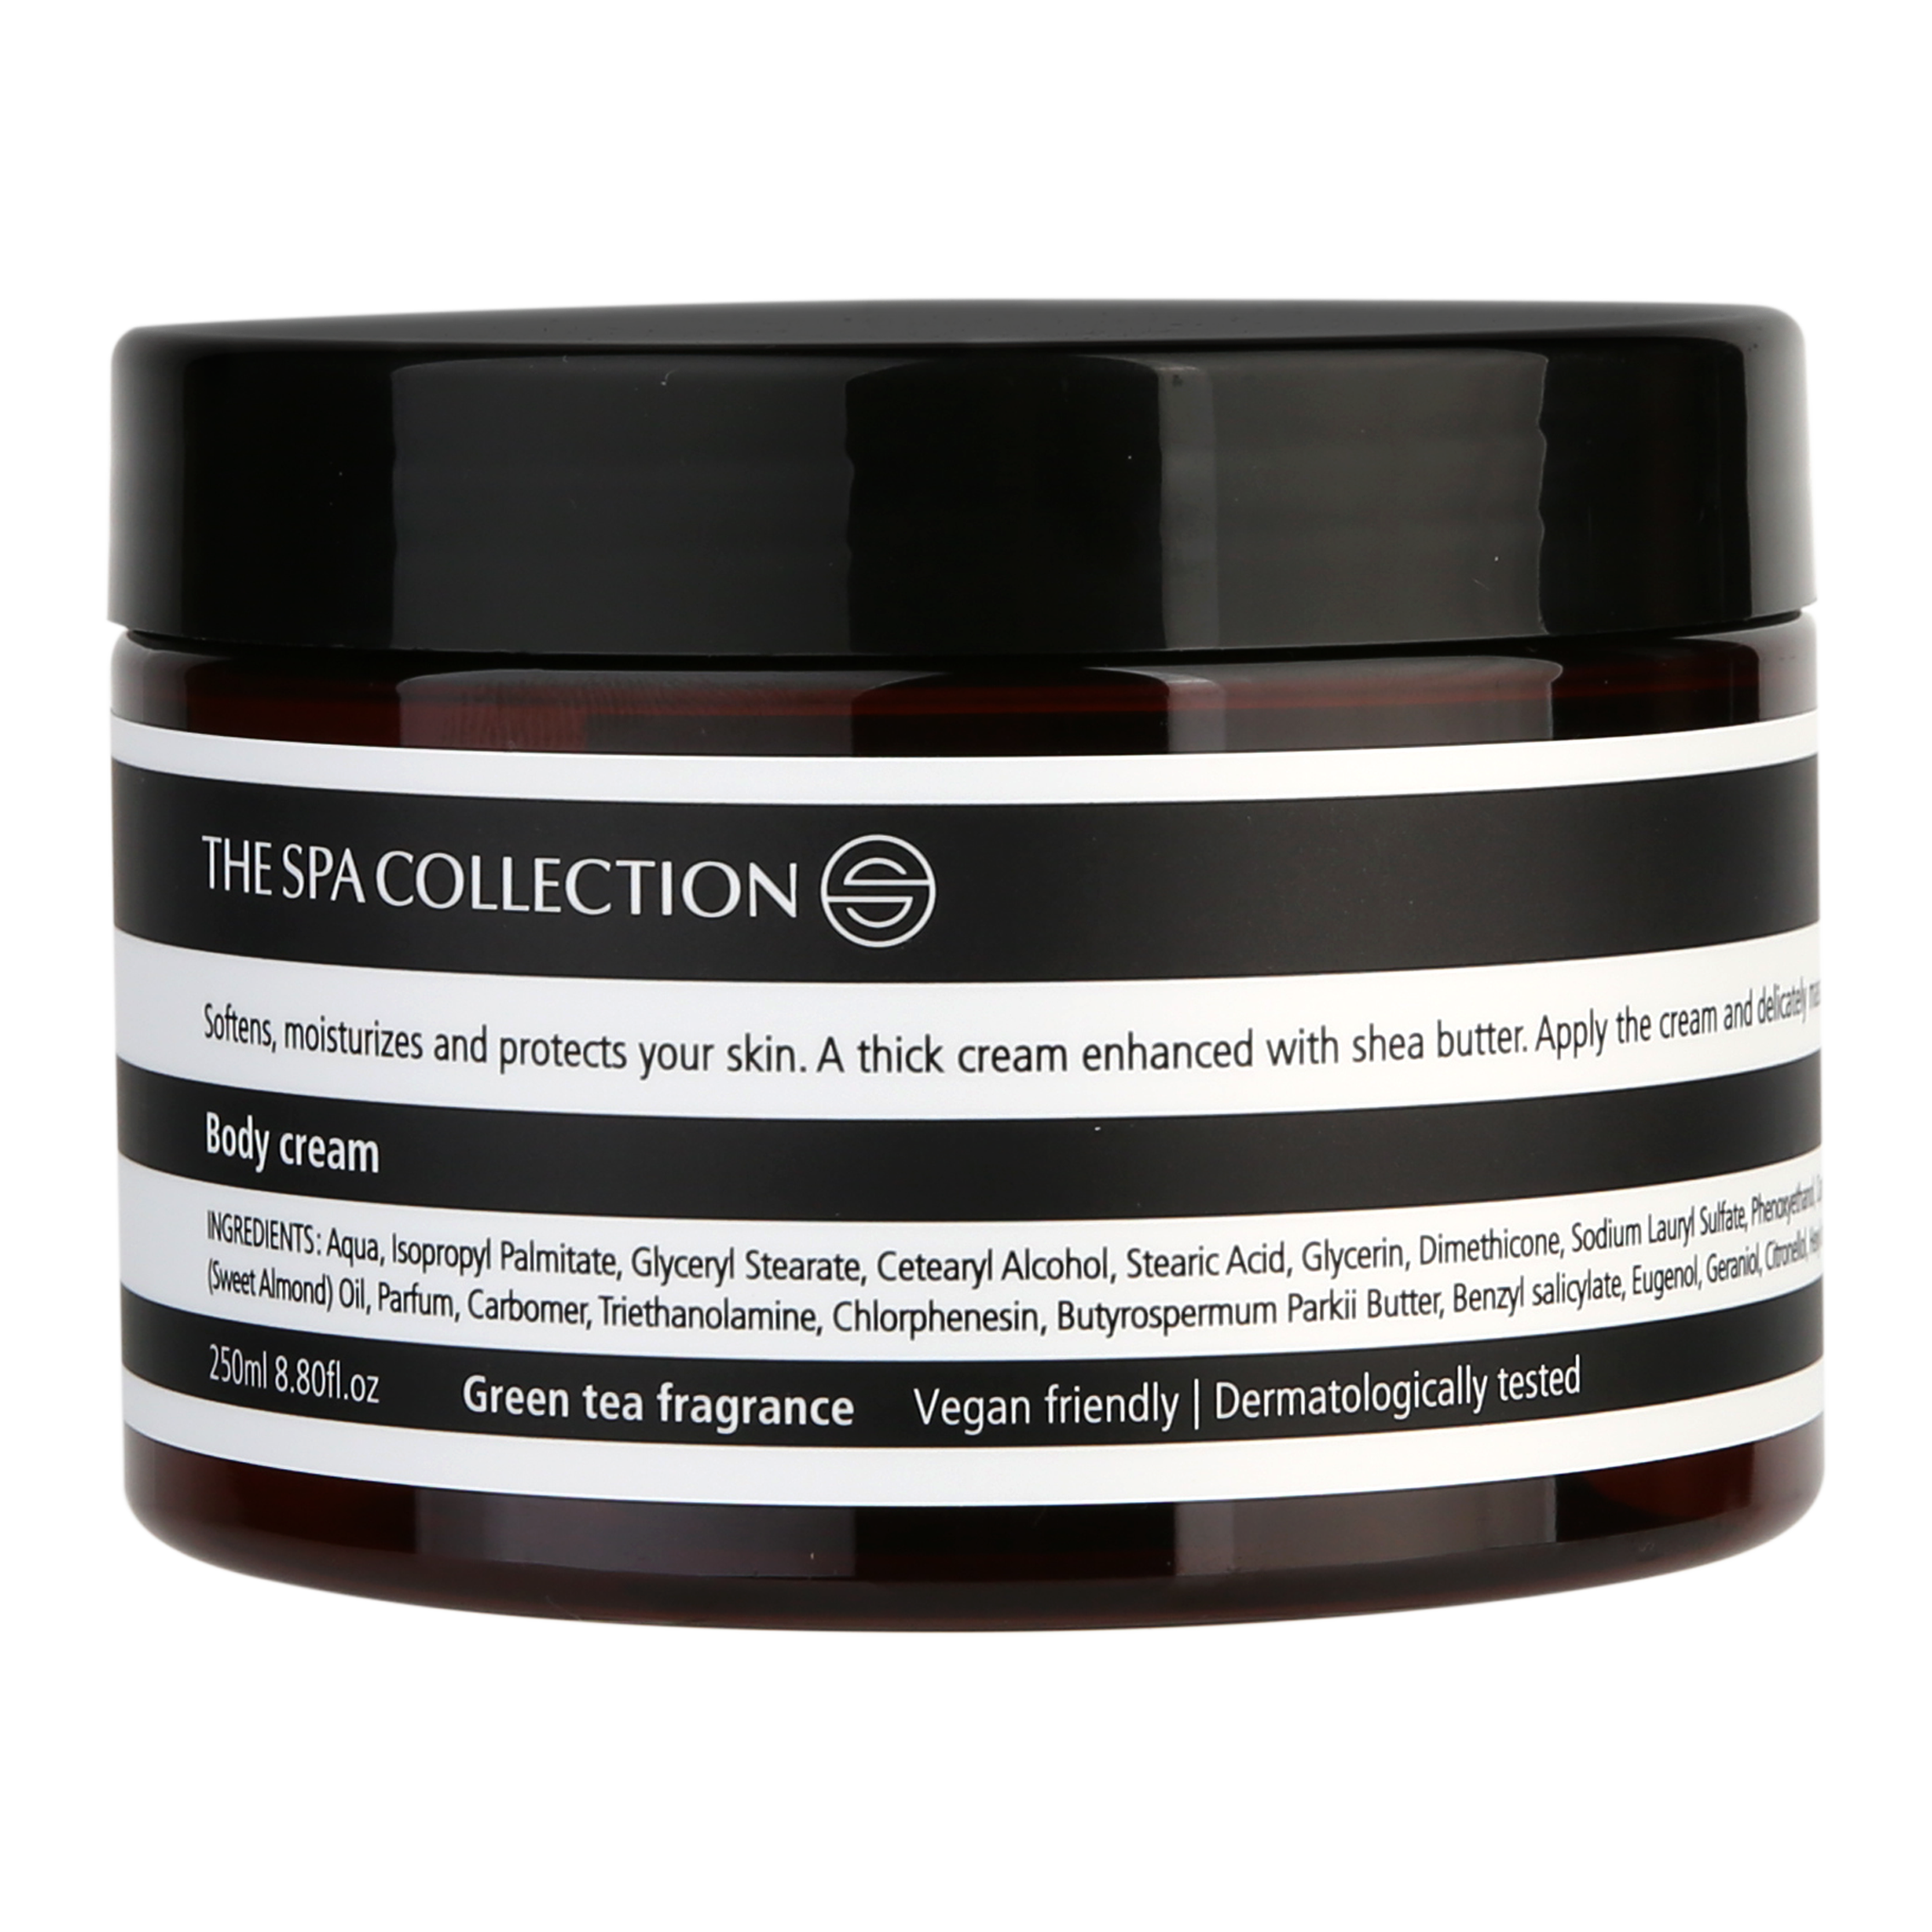 Luxurious Body cream in a 250ml jar by The Spa Collection with Green Tea